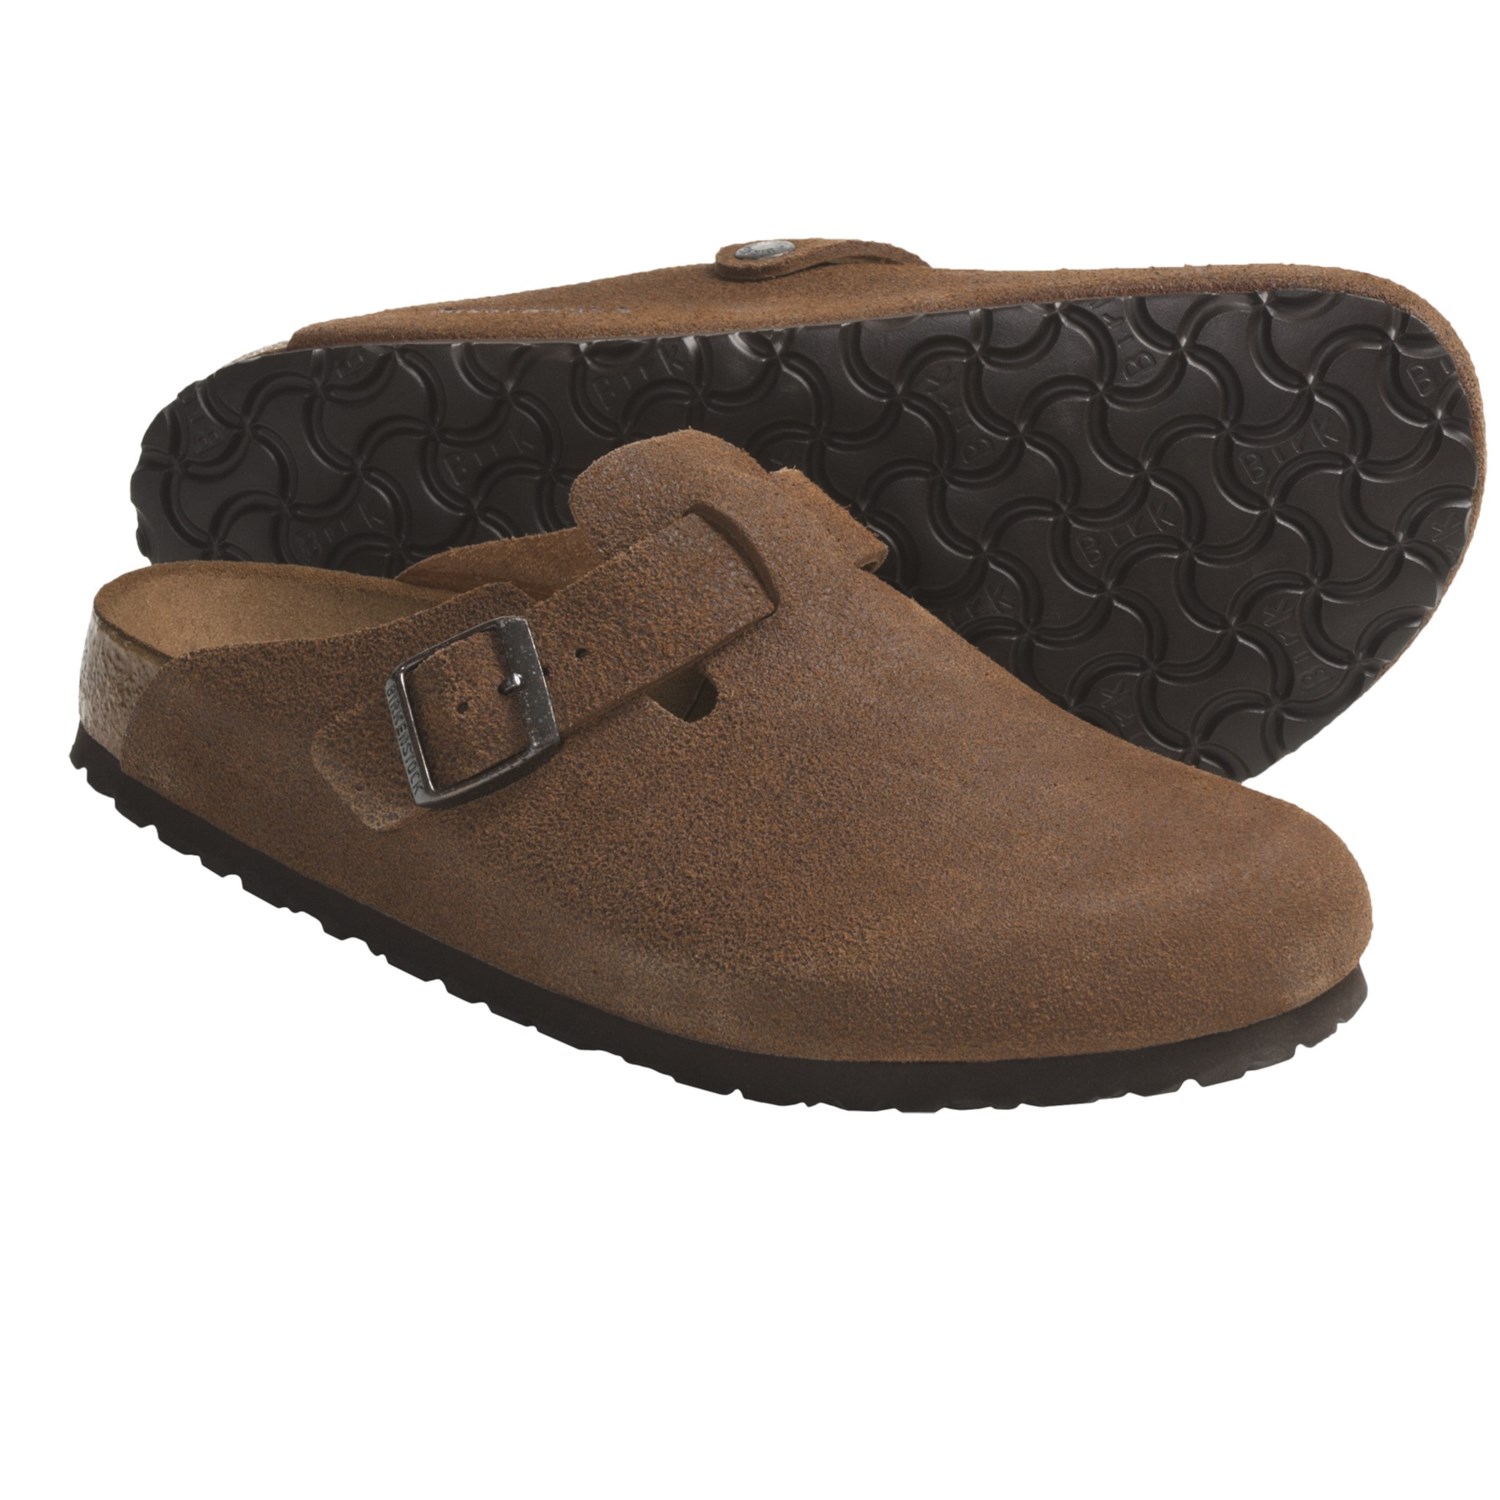 Birkenstock Boston Clogs - Soft Footbed (For Men and Women) in Sumatra ...